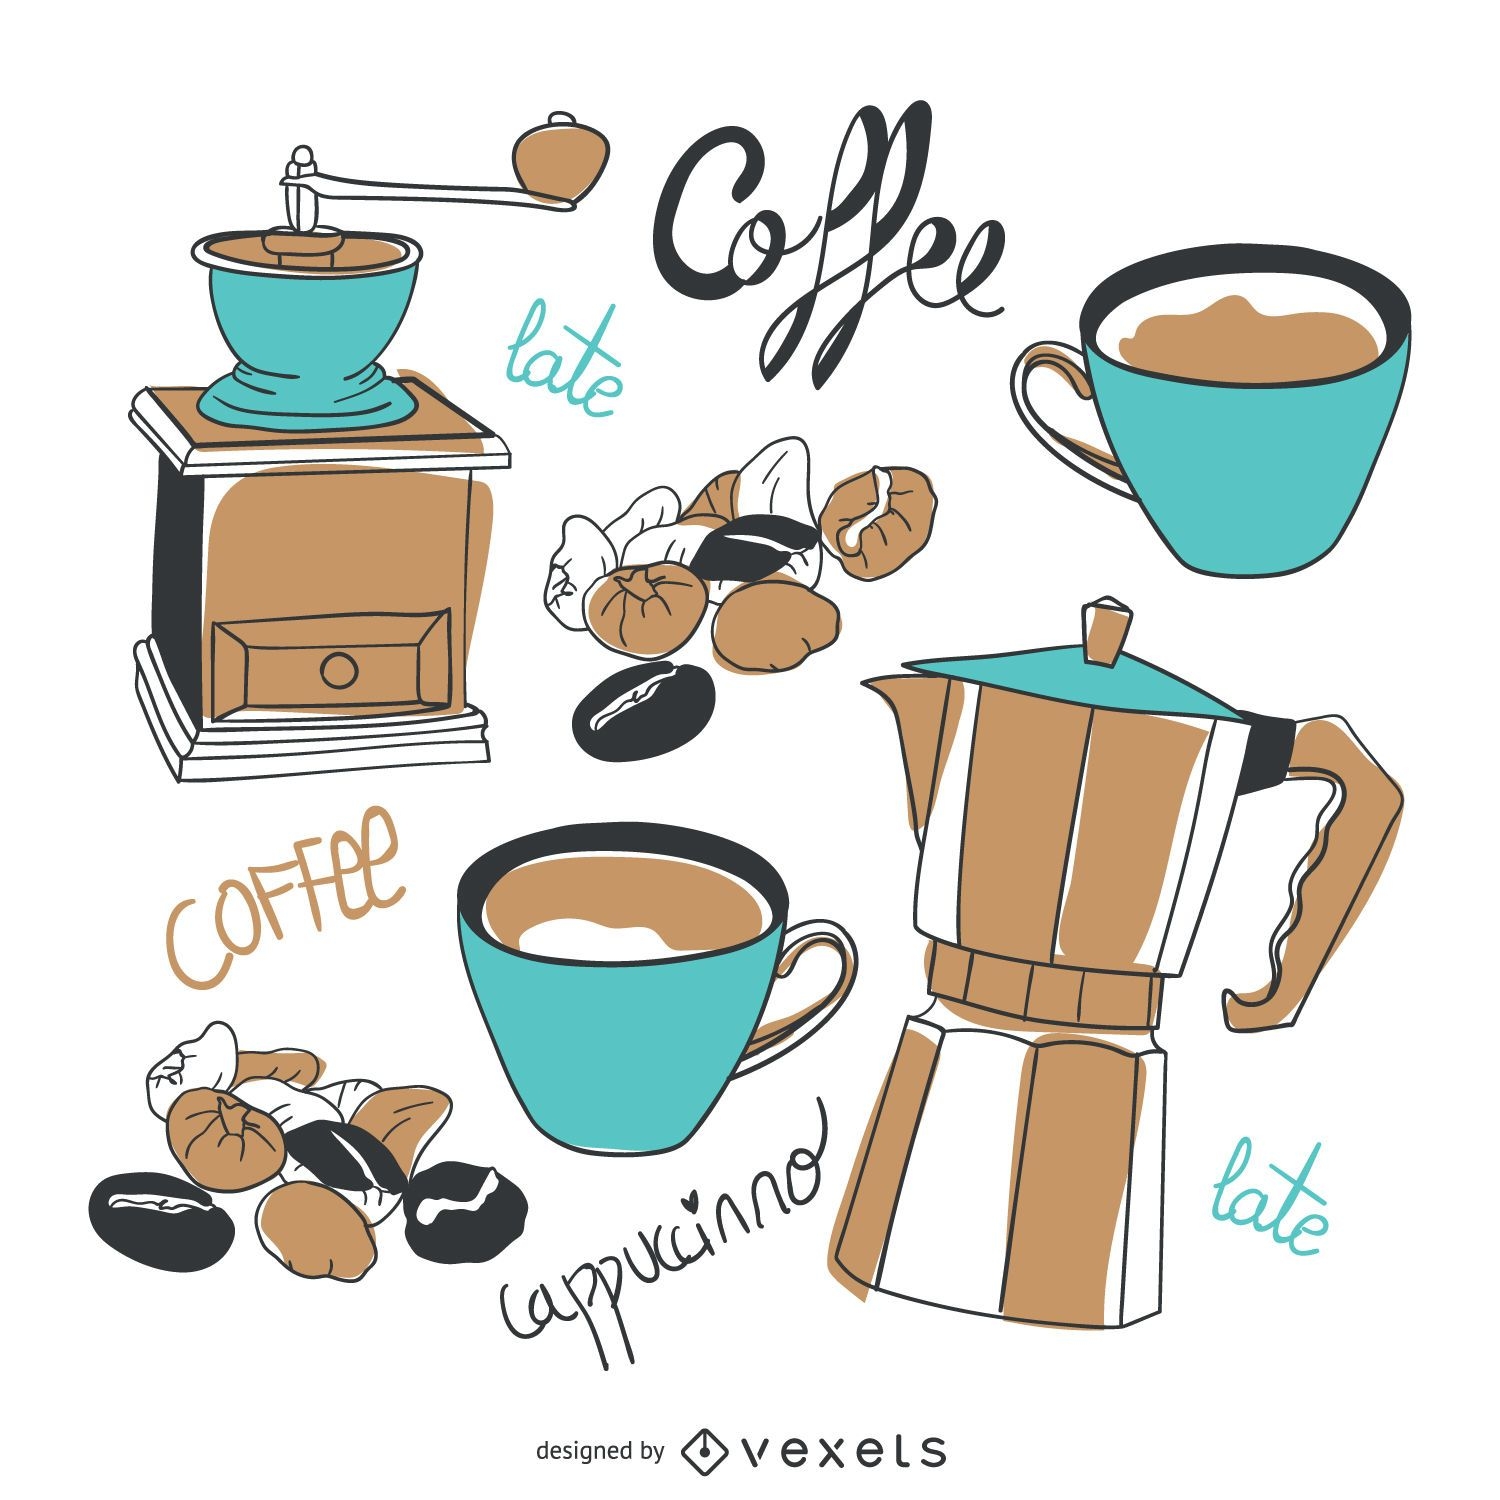 https://images.vexels.com/content/77392/preview/coffee-elements-set-in-hand-drawn-style-bc27c9.png